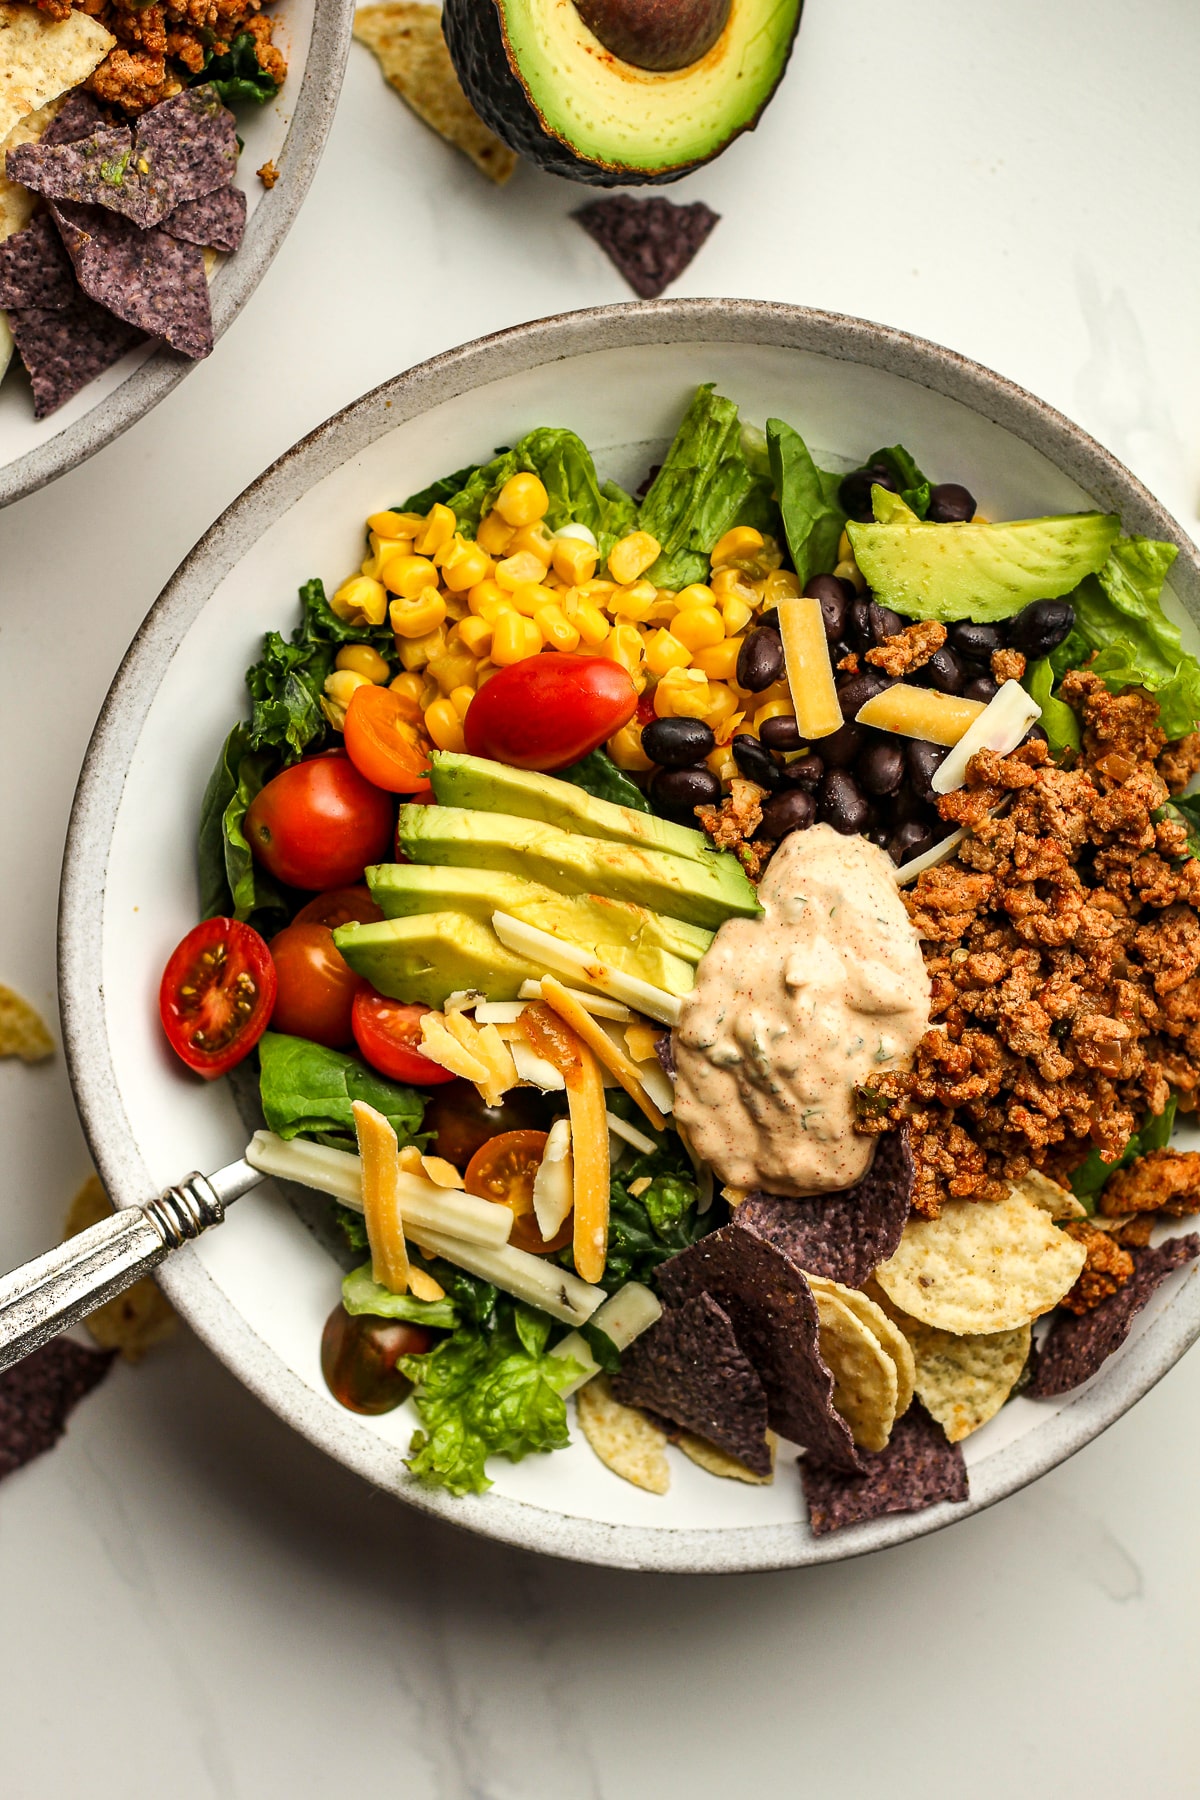 A bowl of the taco salad showing all of the ingredients.